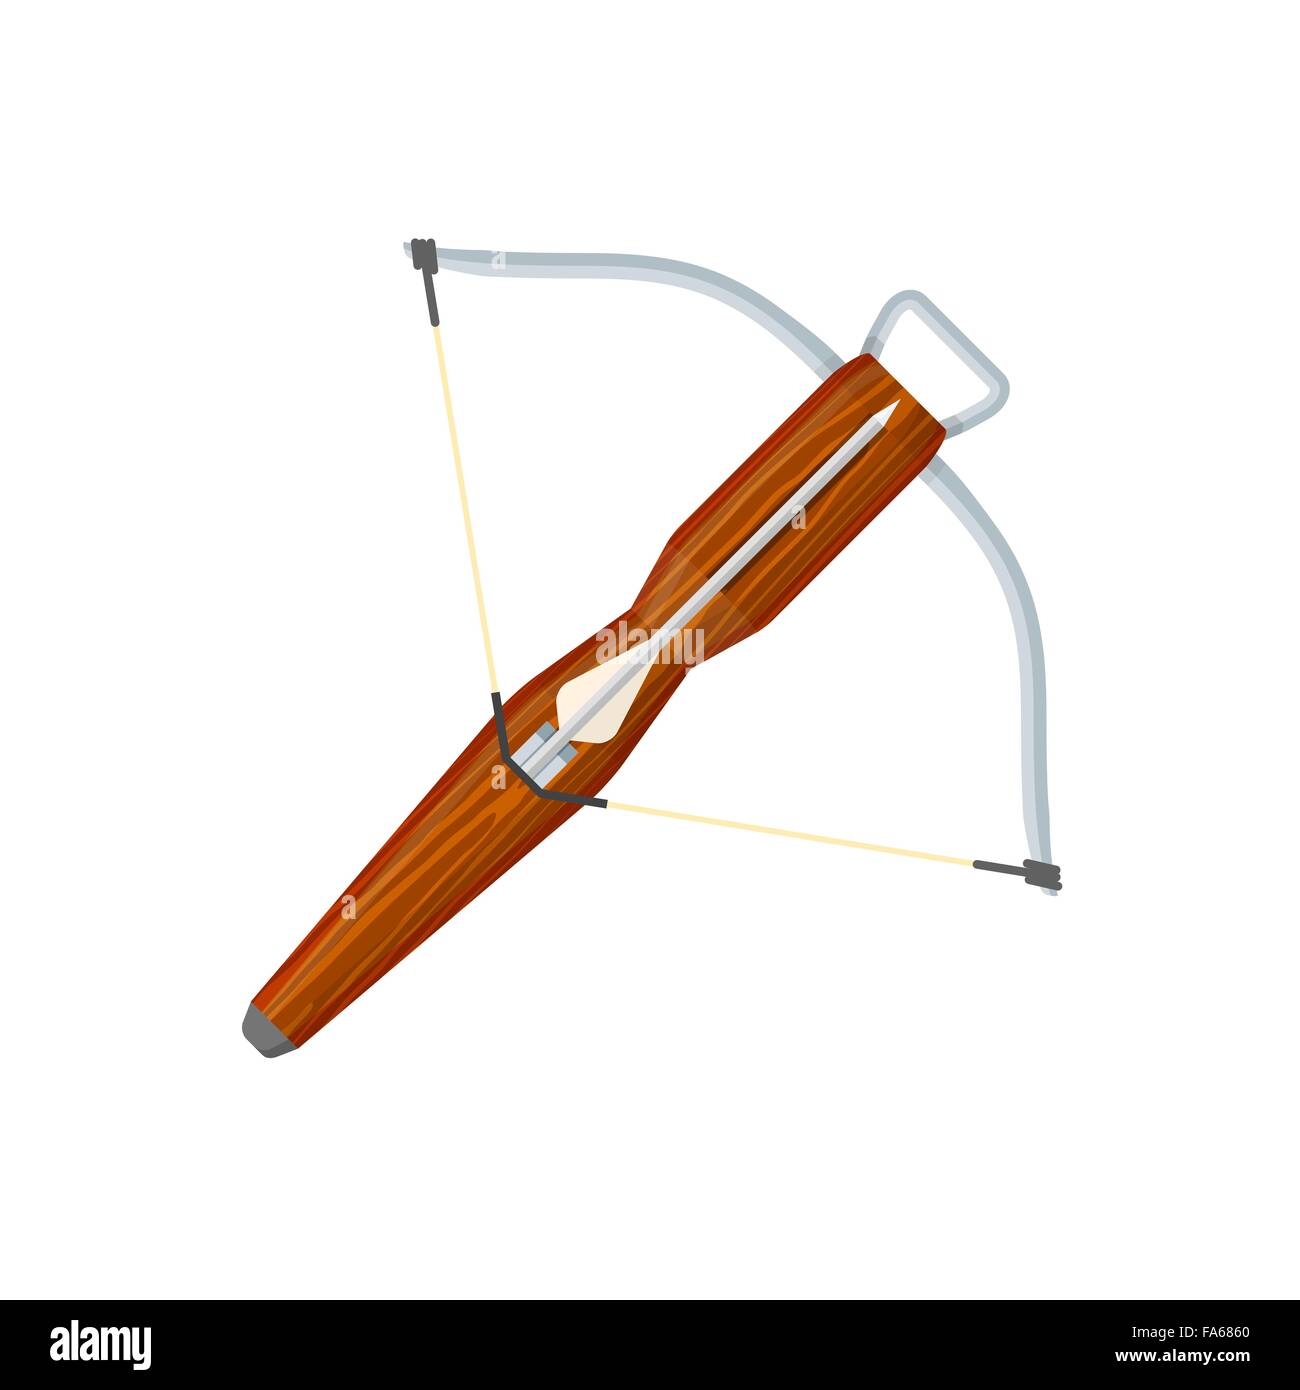 vector colorer flat design medieval wooden textured metal elements crossbow with arrow isolated illustration on white background Stock Vector